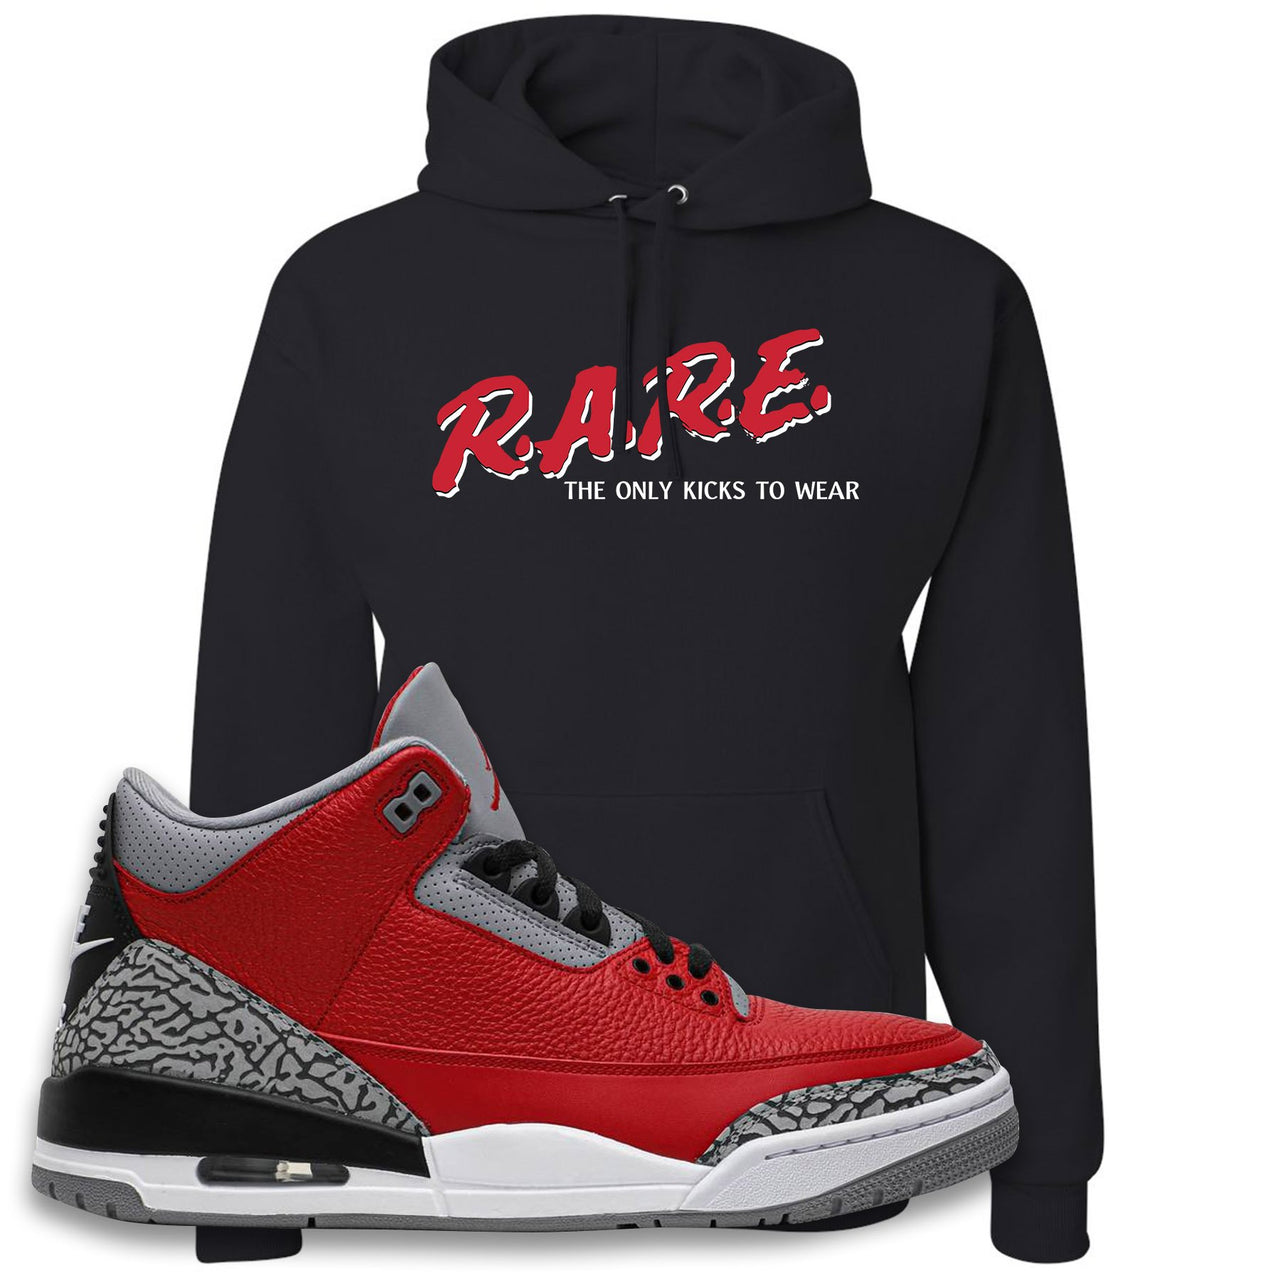 Jordan 3 Red Cement Chicago All-Star Sneaker Black Pullover Hoodie | Hoodie to match Jordan 3 All Star Red Cement Shoes | Rare